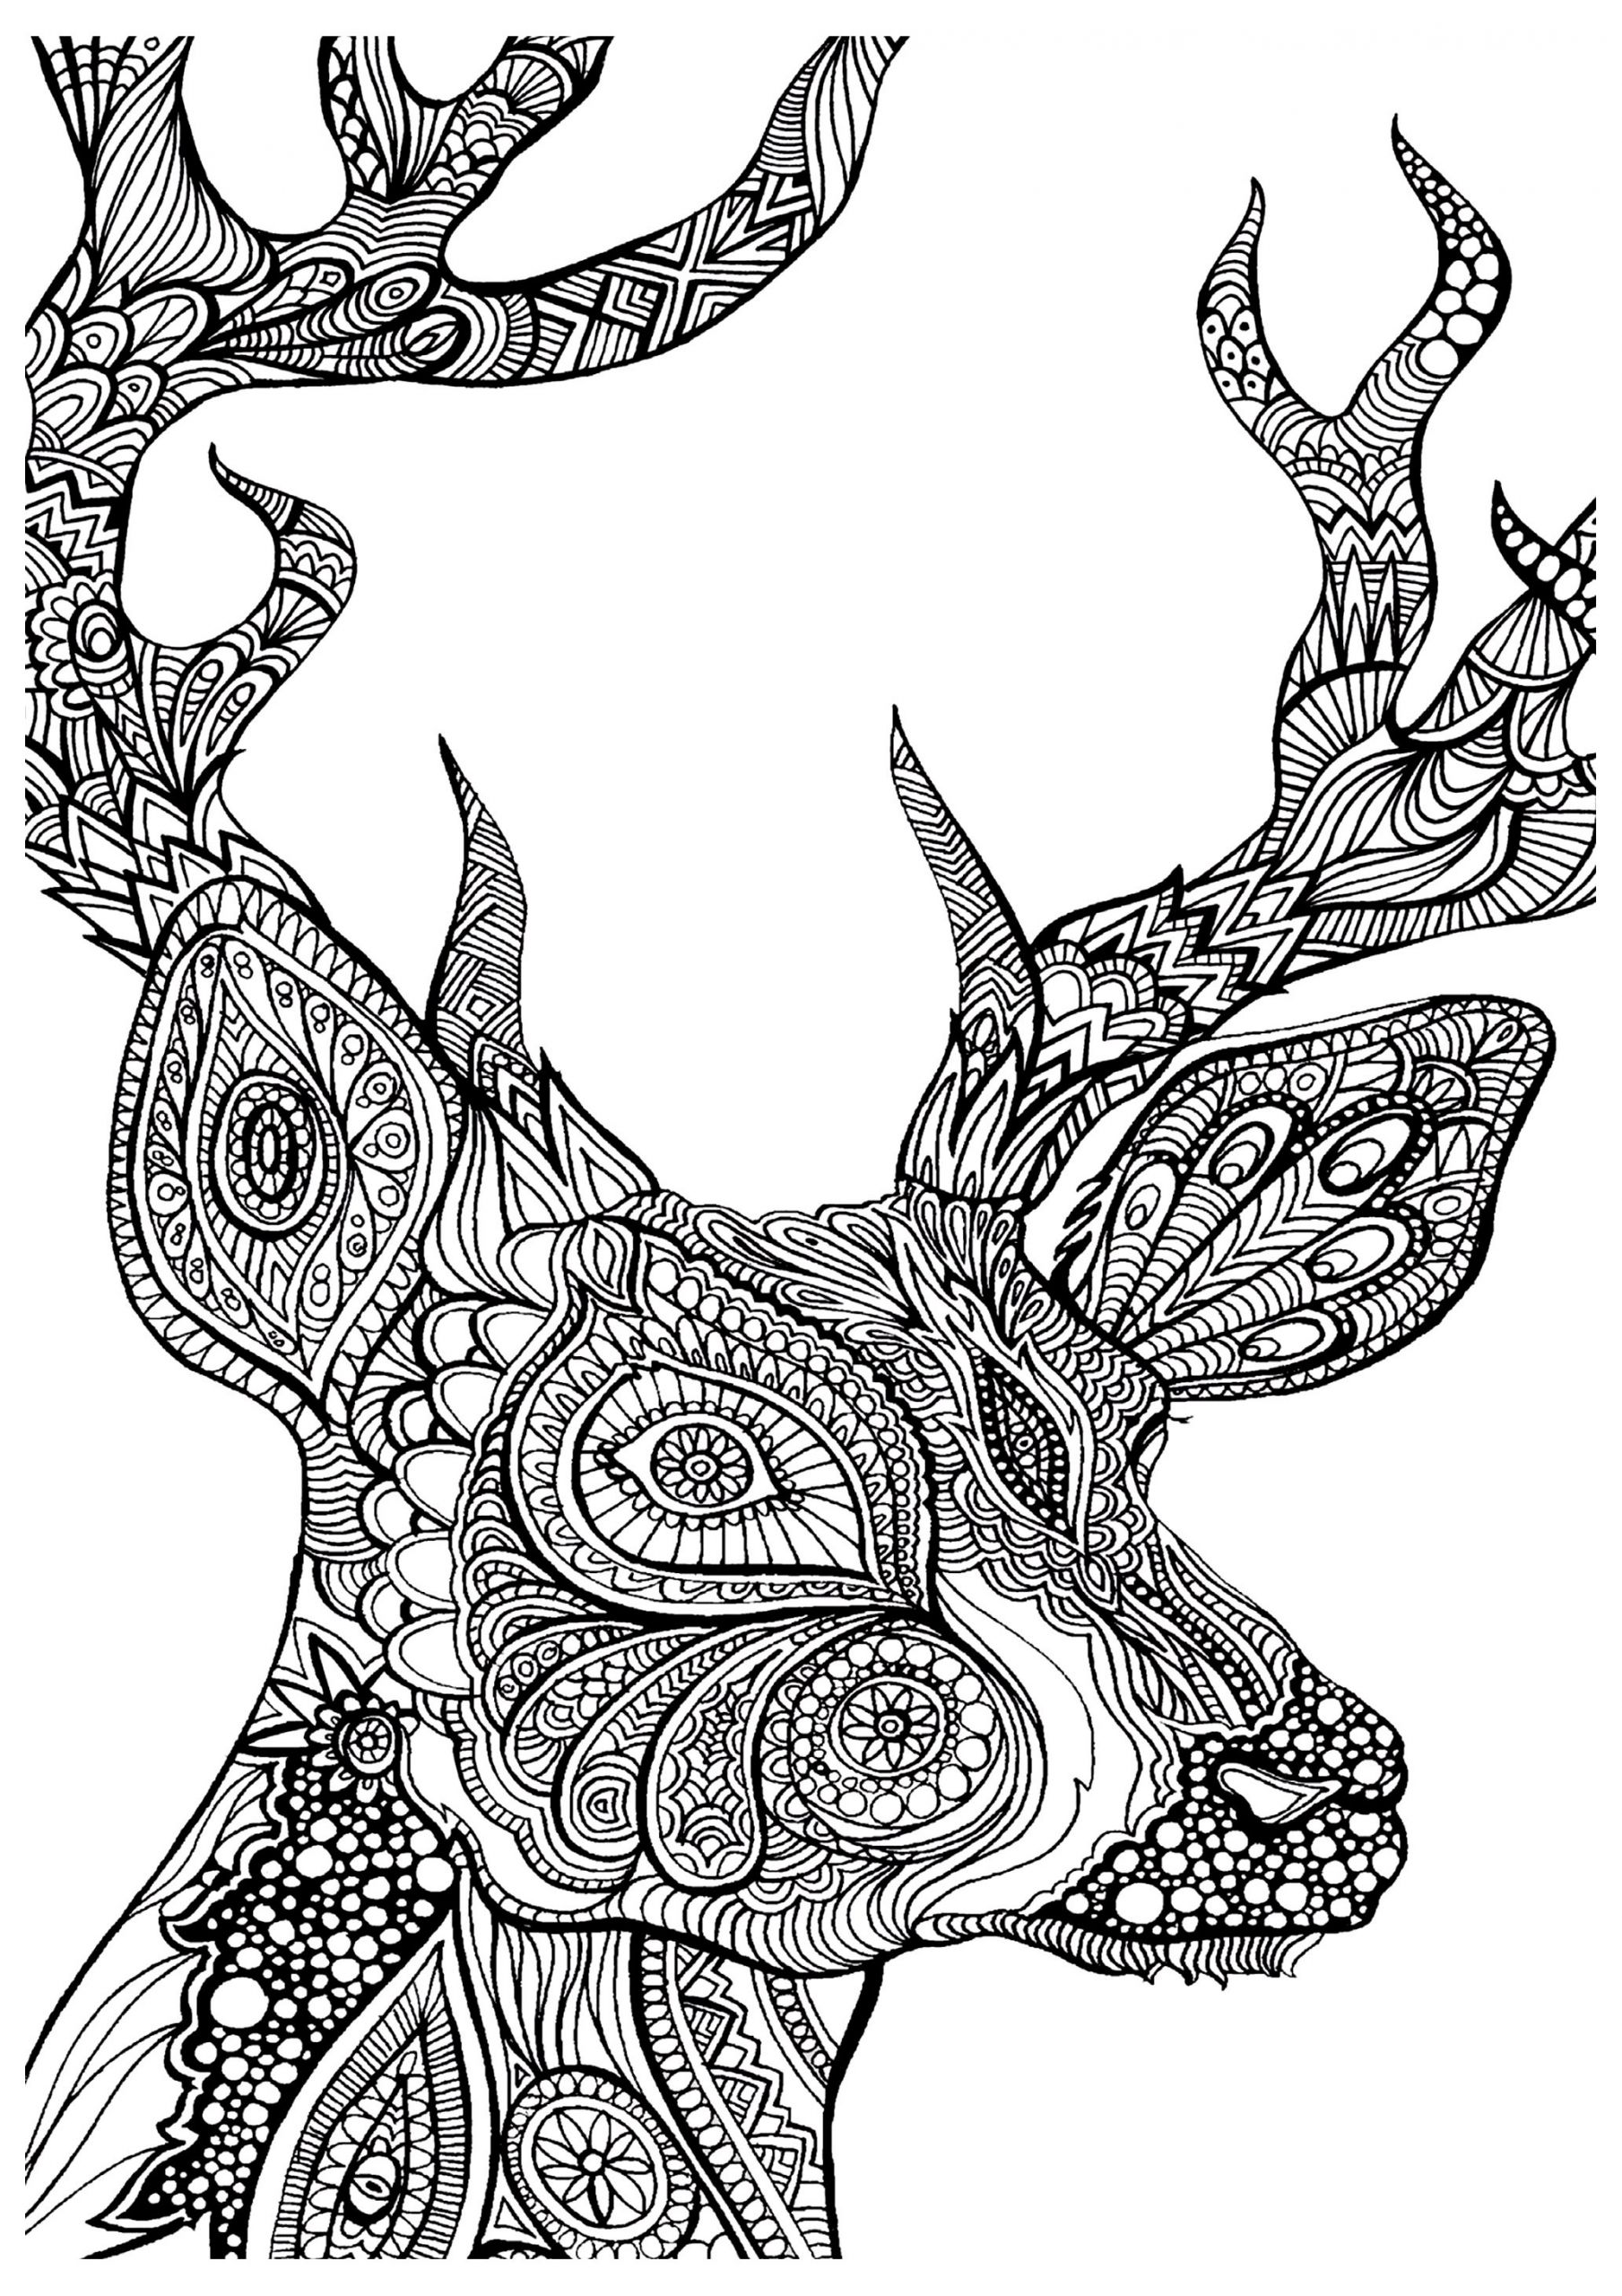 Best Adult Coloring Pages
 19 of the Best Adult Colouring Pages Free Printables for